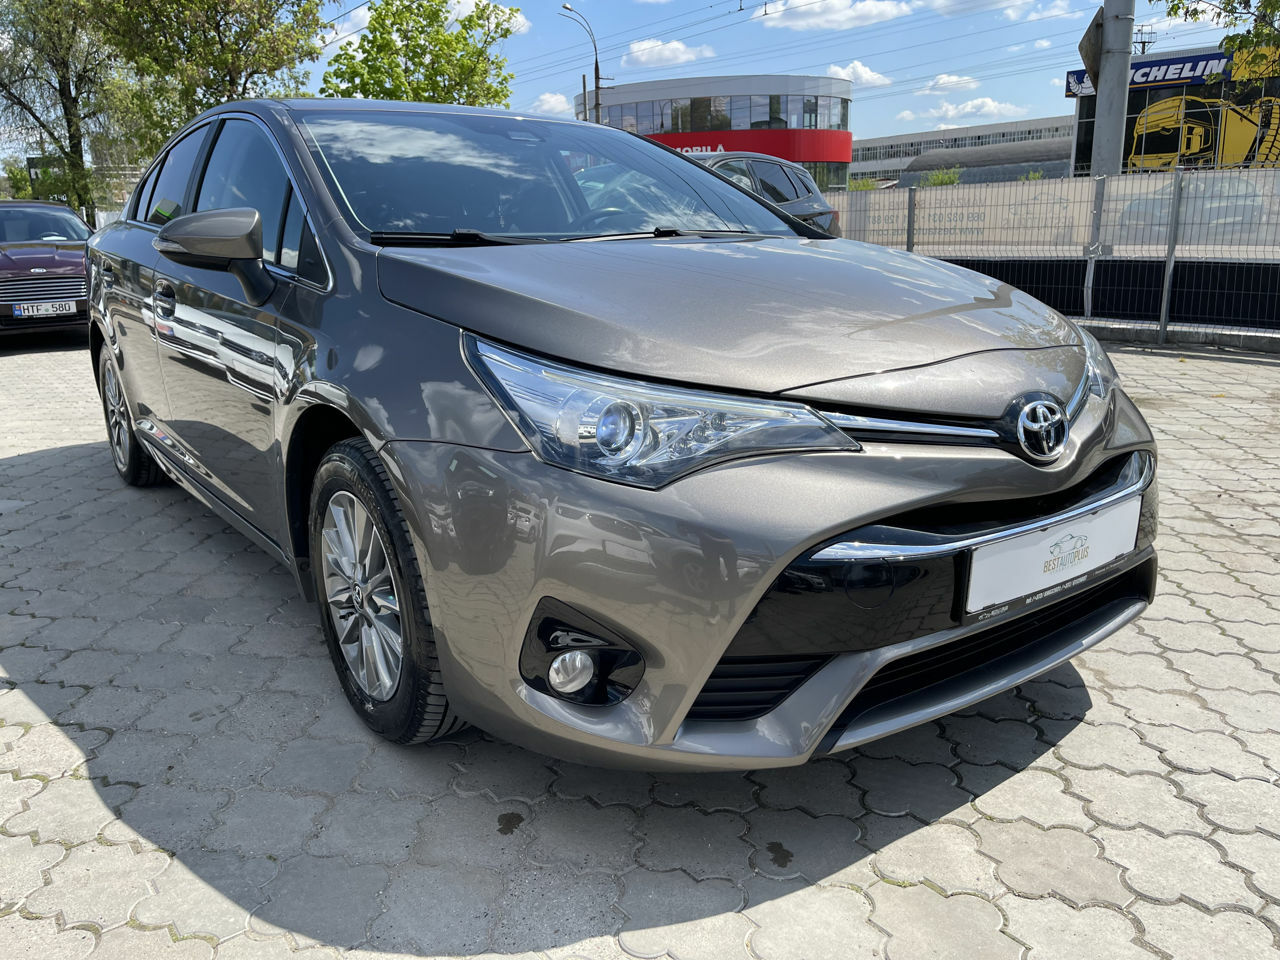 <span style="font-weight: 700;">toyota avensis</span>